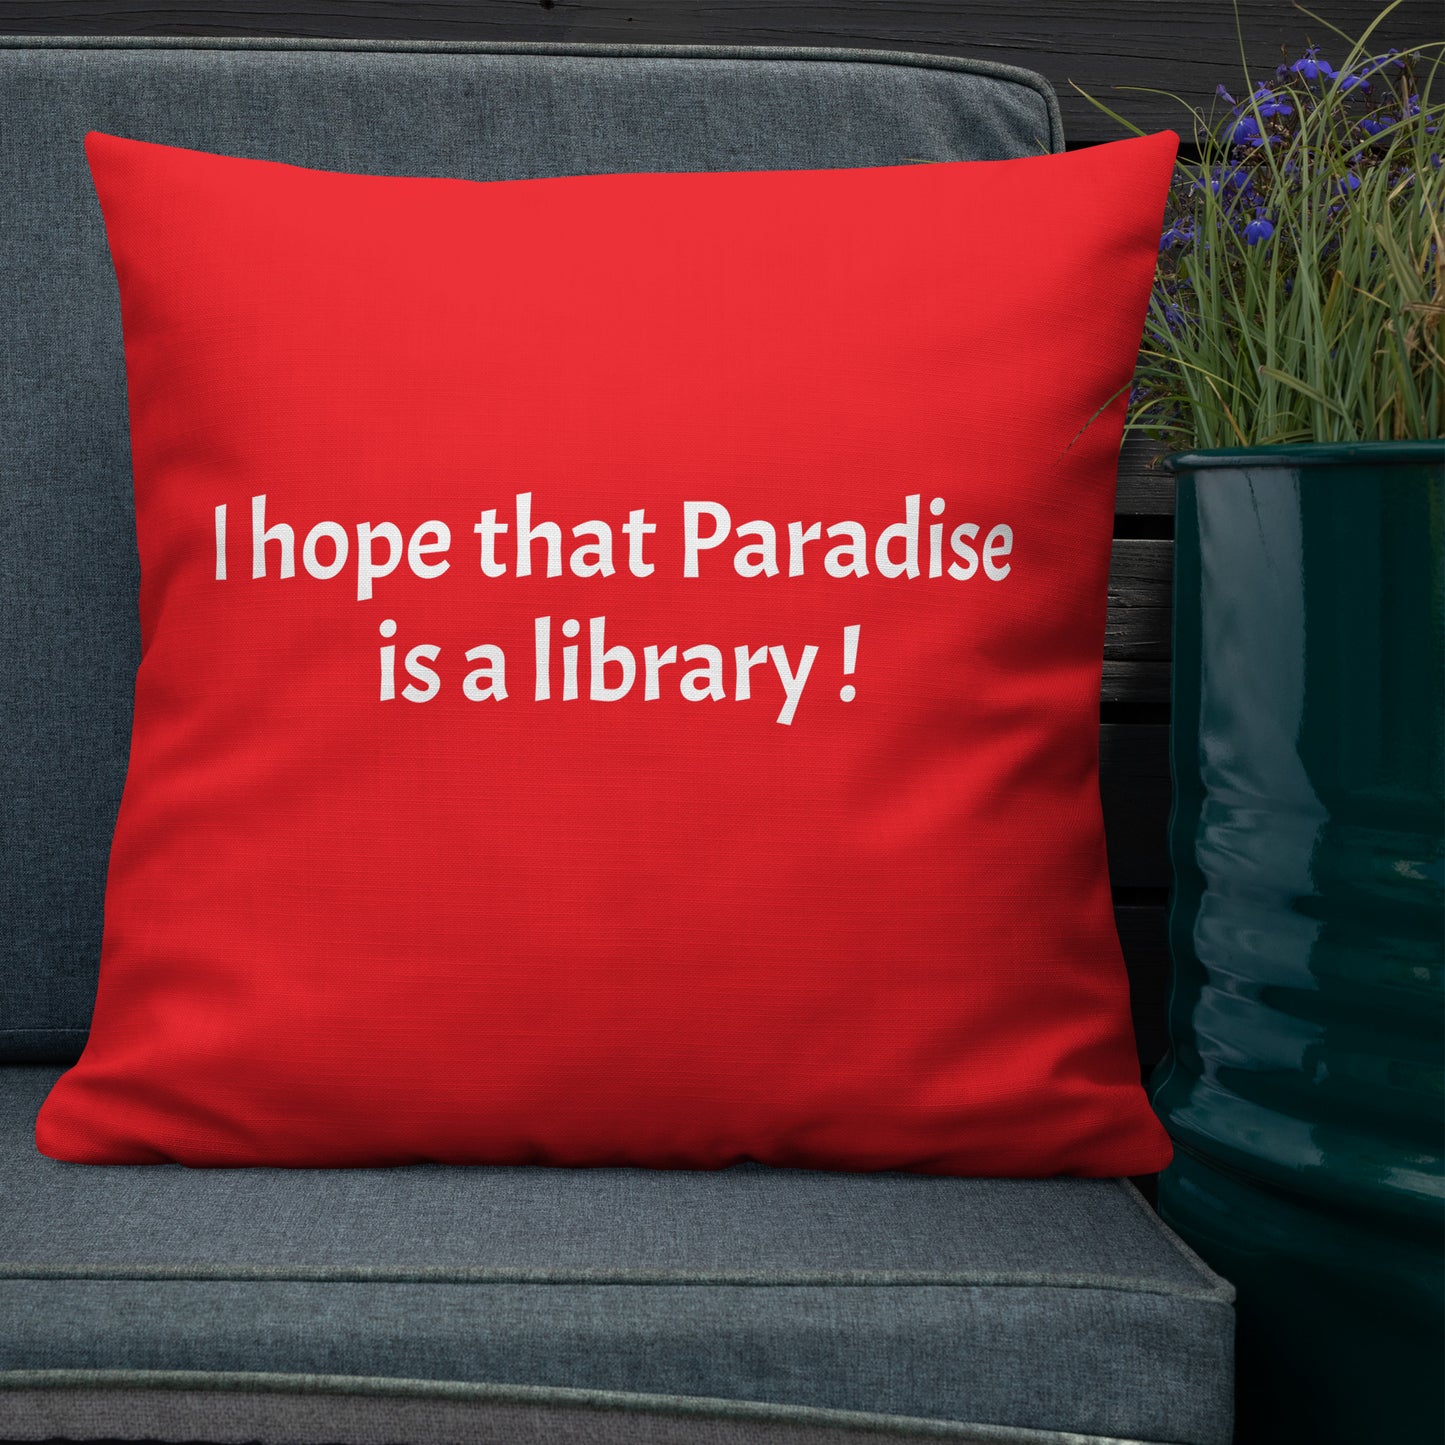 I hope that Paradise is a library ! - Premium Pillow